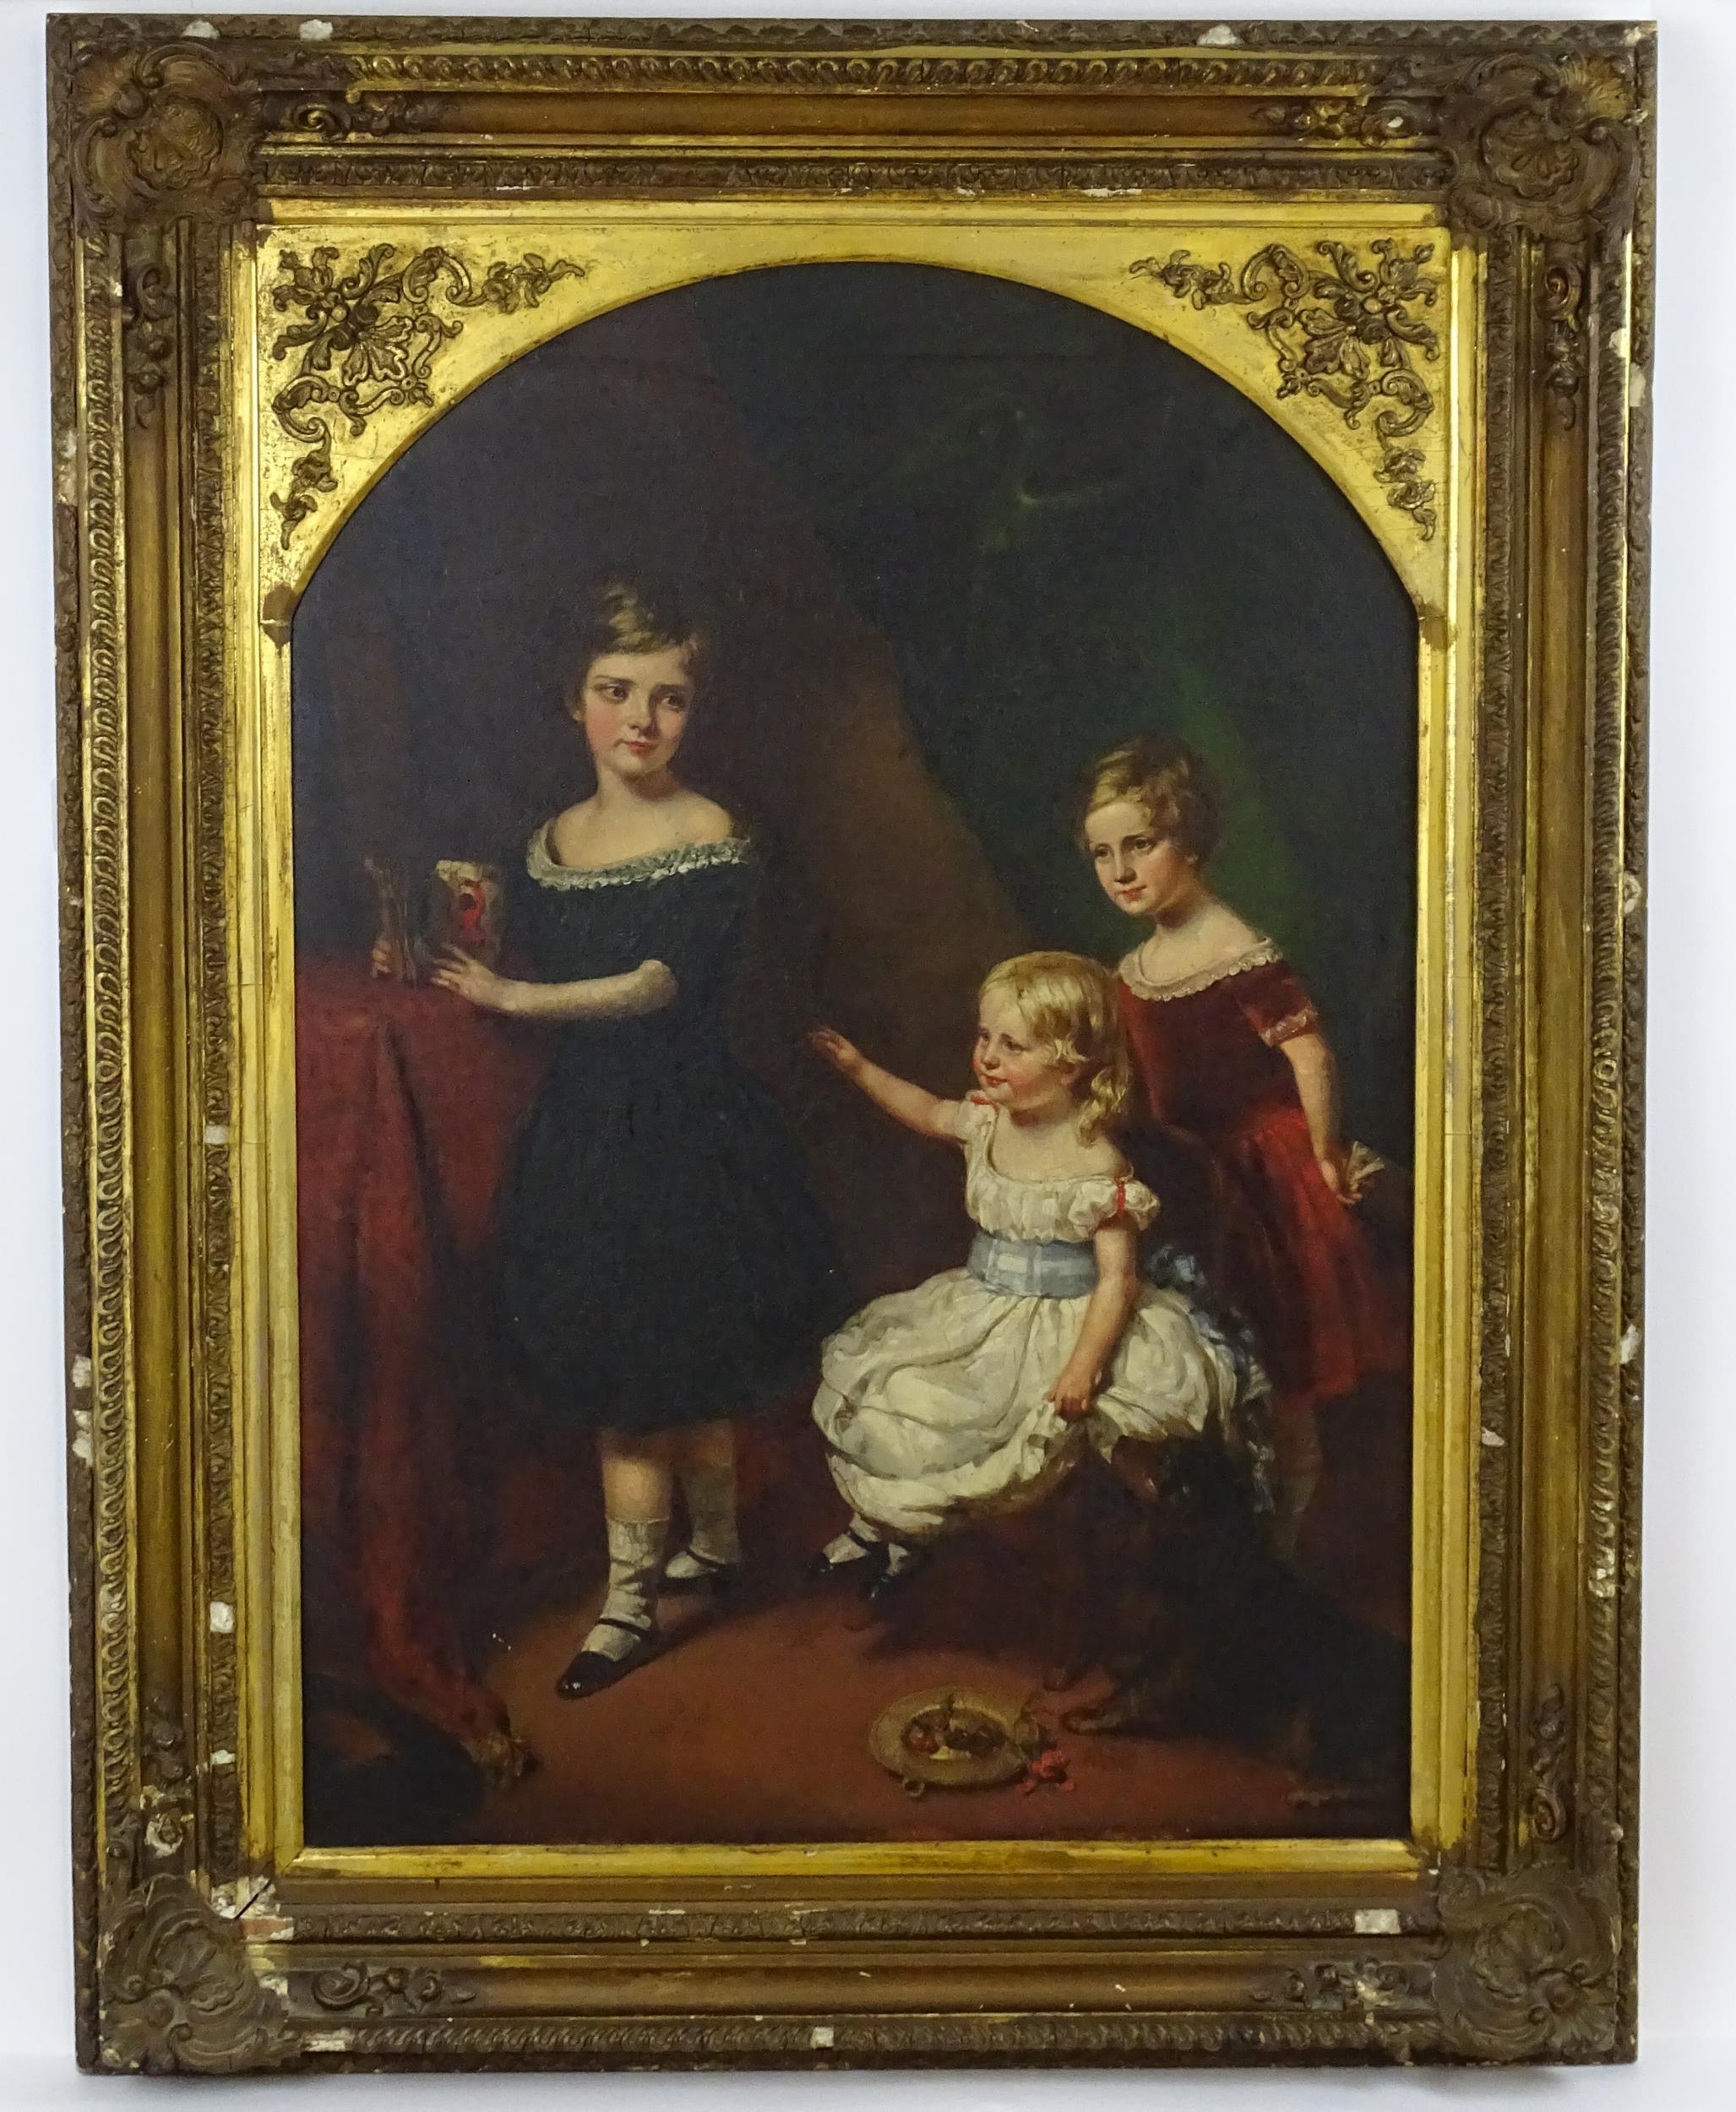 19th century, English School, Oil on canvas, A portrait of three children and a dog. Approx. 31" x